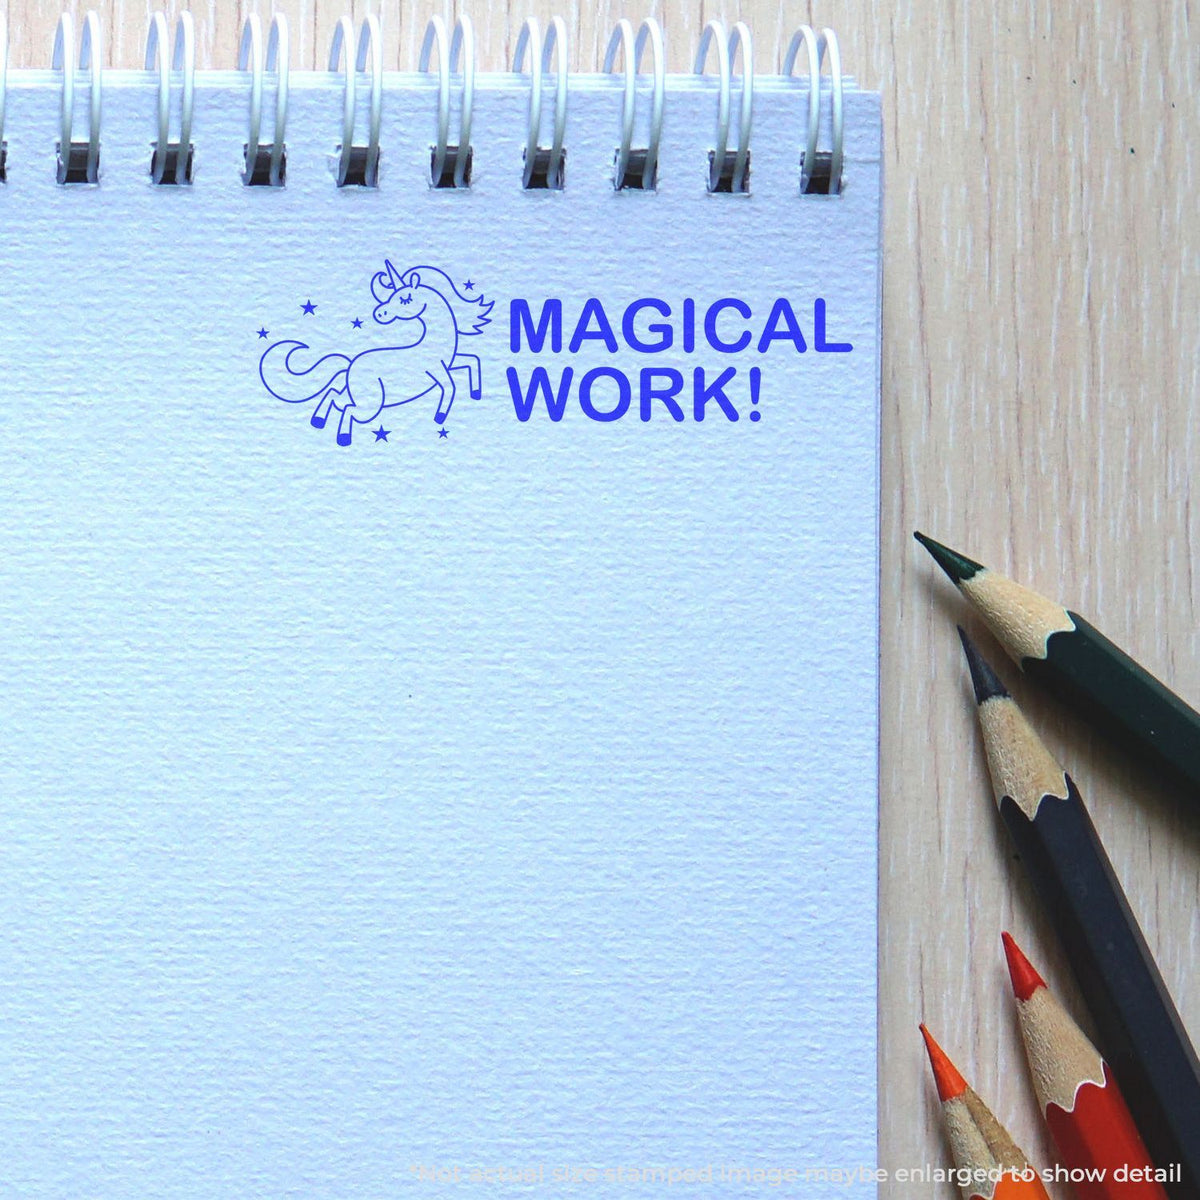 In Use Self-Inking Magical Work Stamp Image